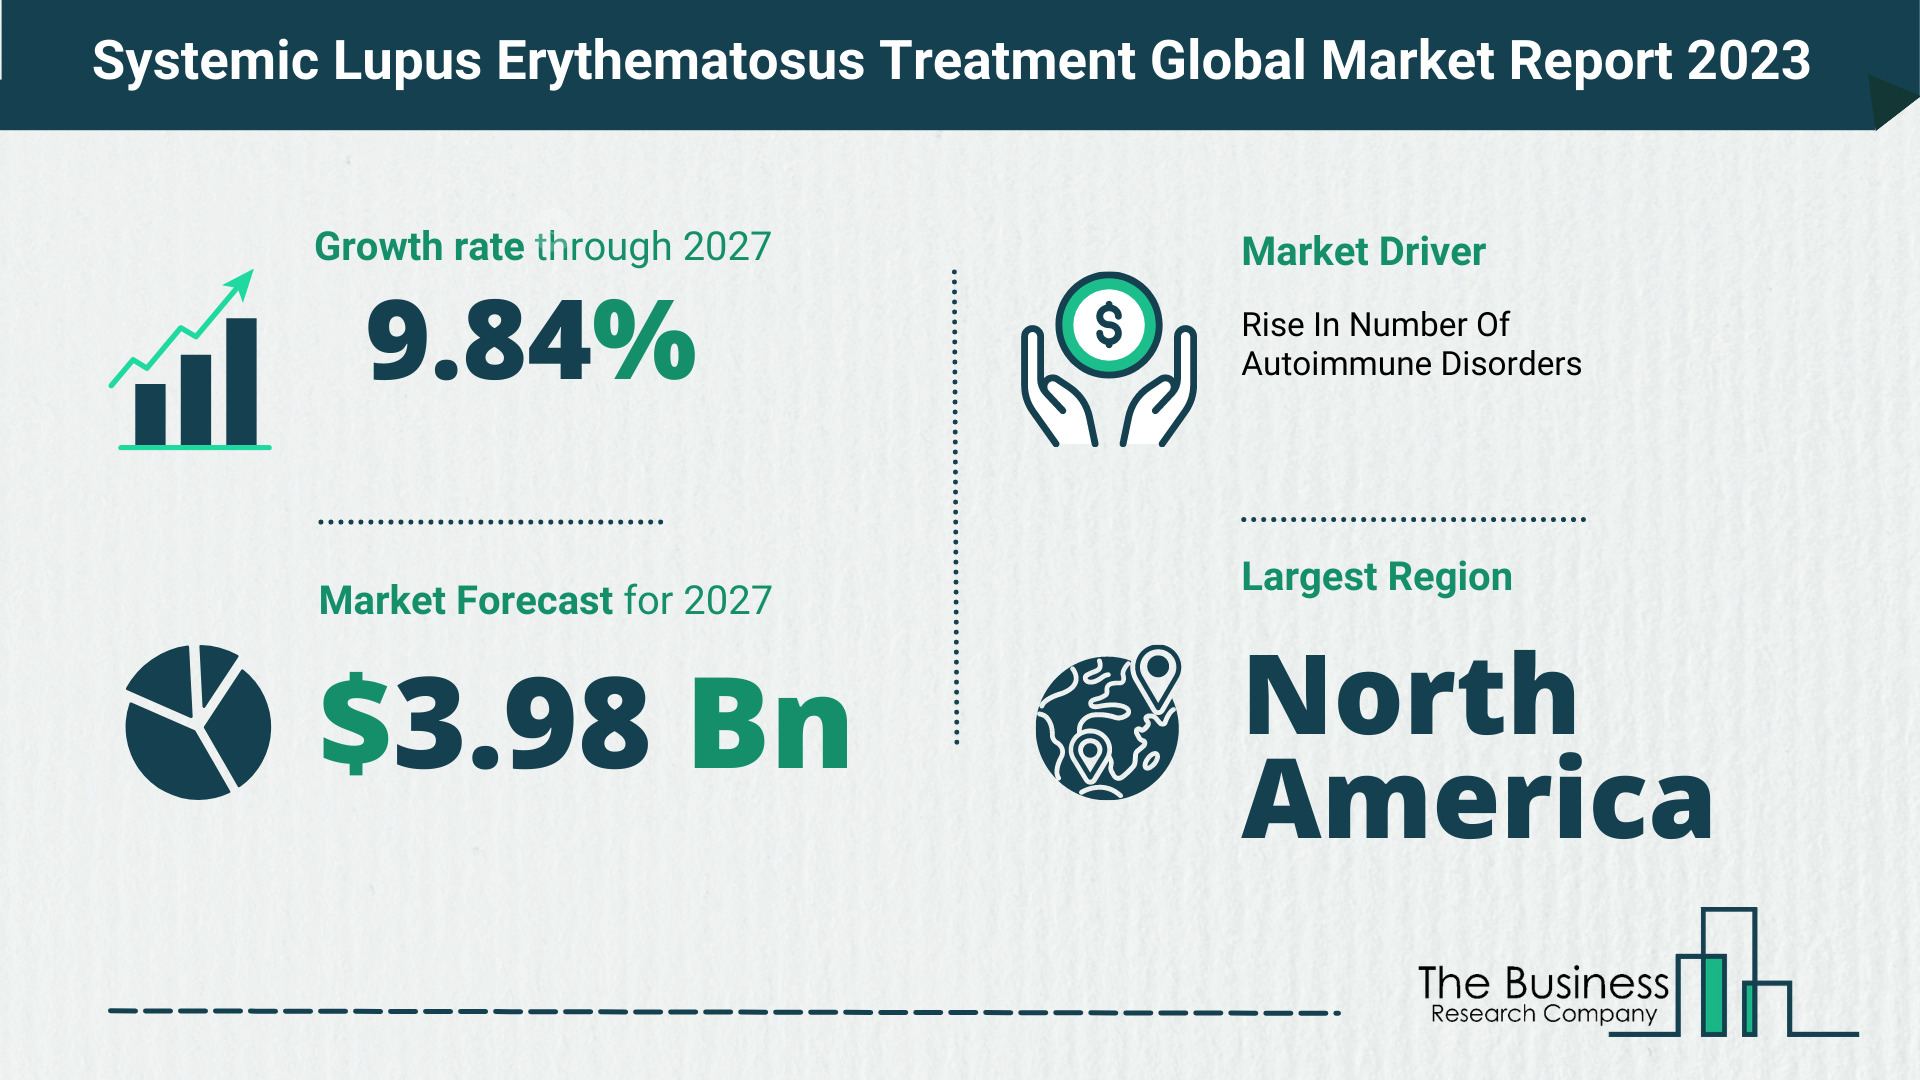 Global Systemic Lupus Erythematosus Treatment Market Opportunities And Strategies 2023